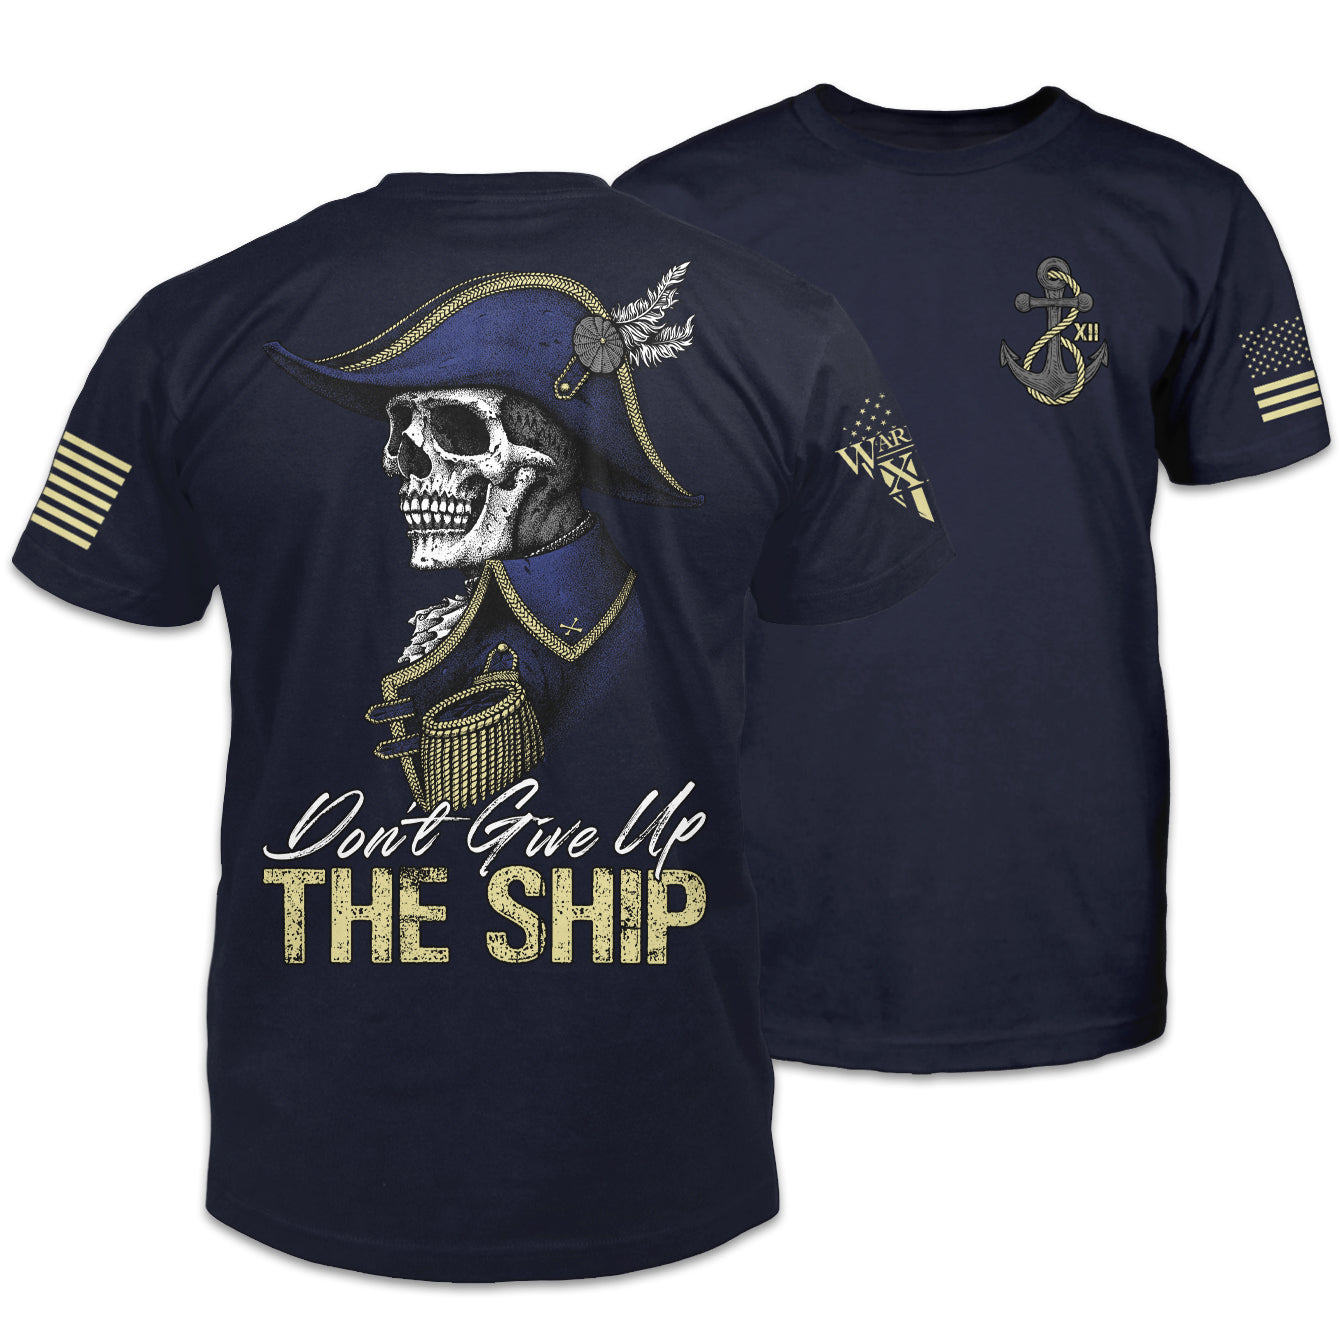 Front and back navy blue t-shirt with the words "Don't give up the ship" and a skeleton of Captain James Lawrence printed on the shirt.